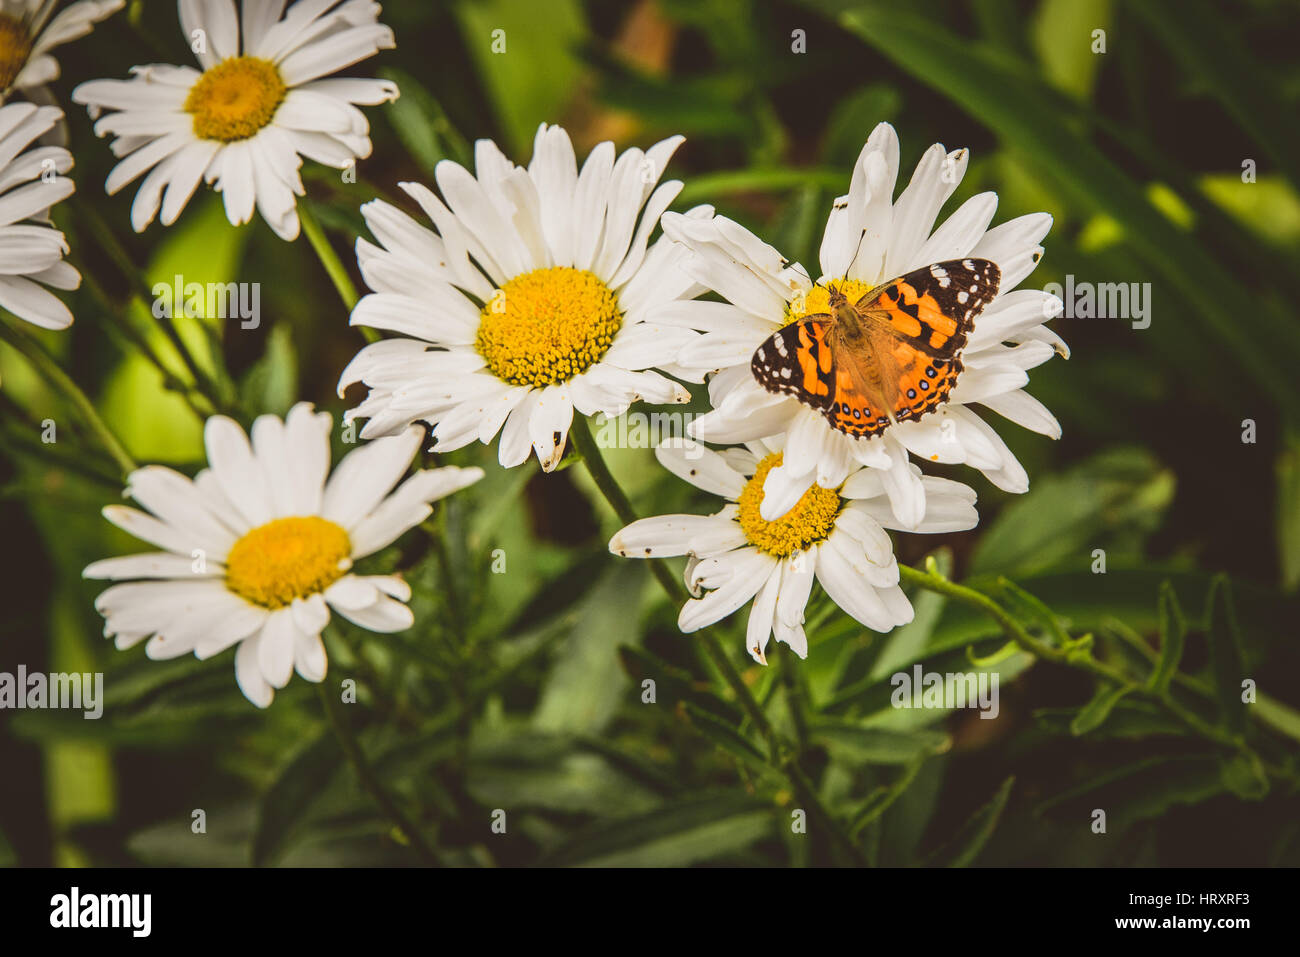 Painted lady butterfly on daisies Stock Photo